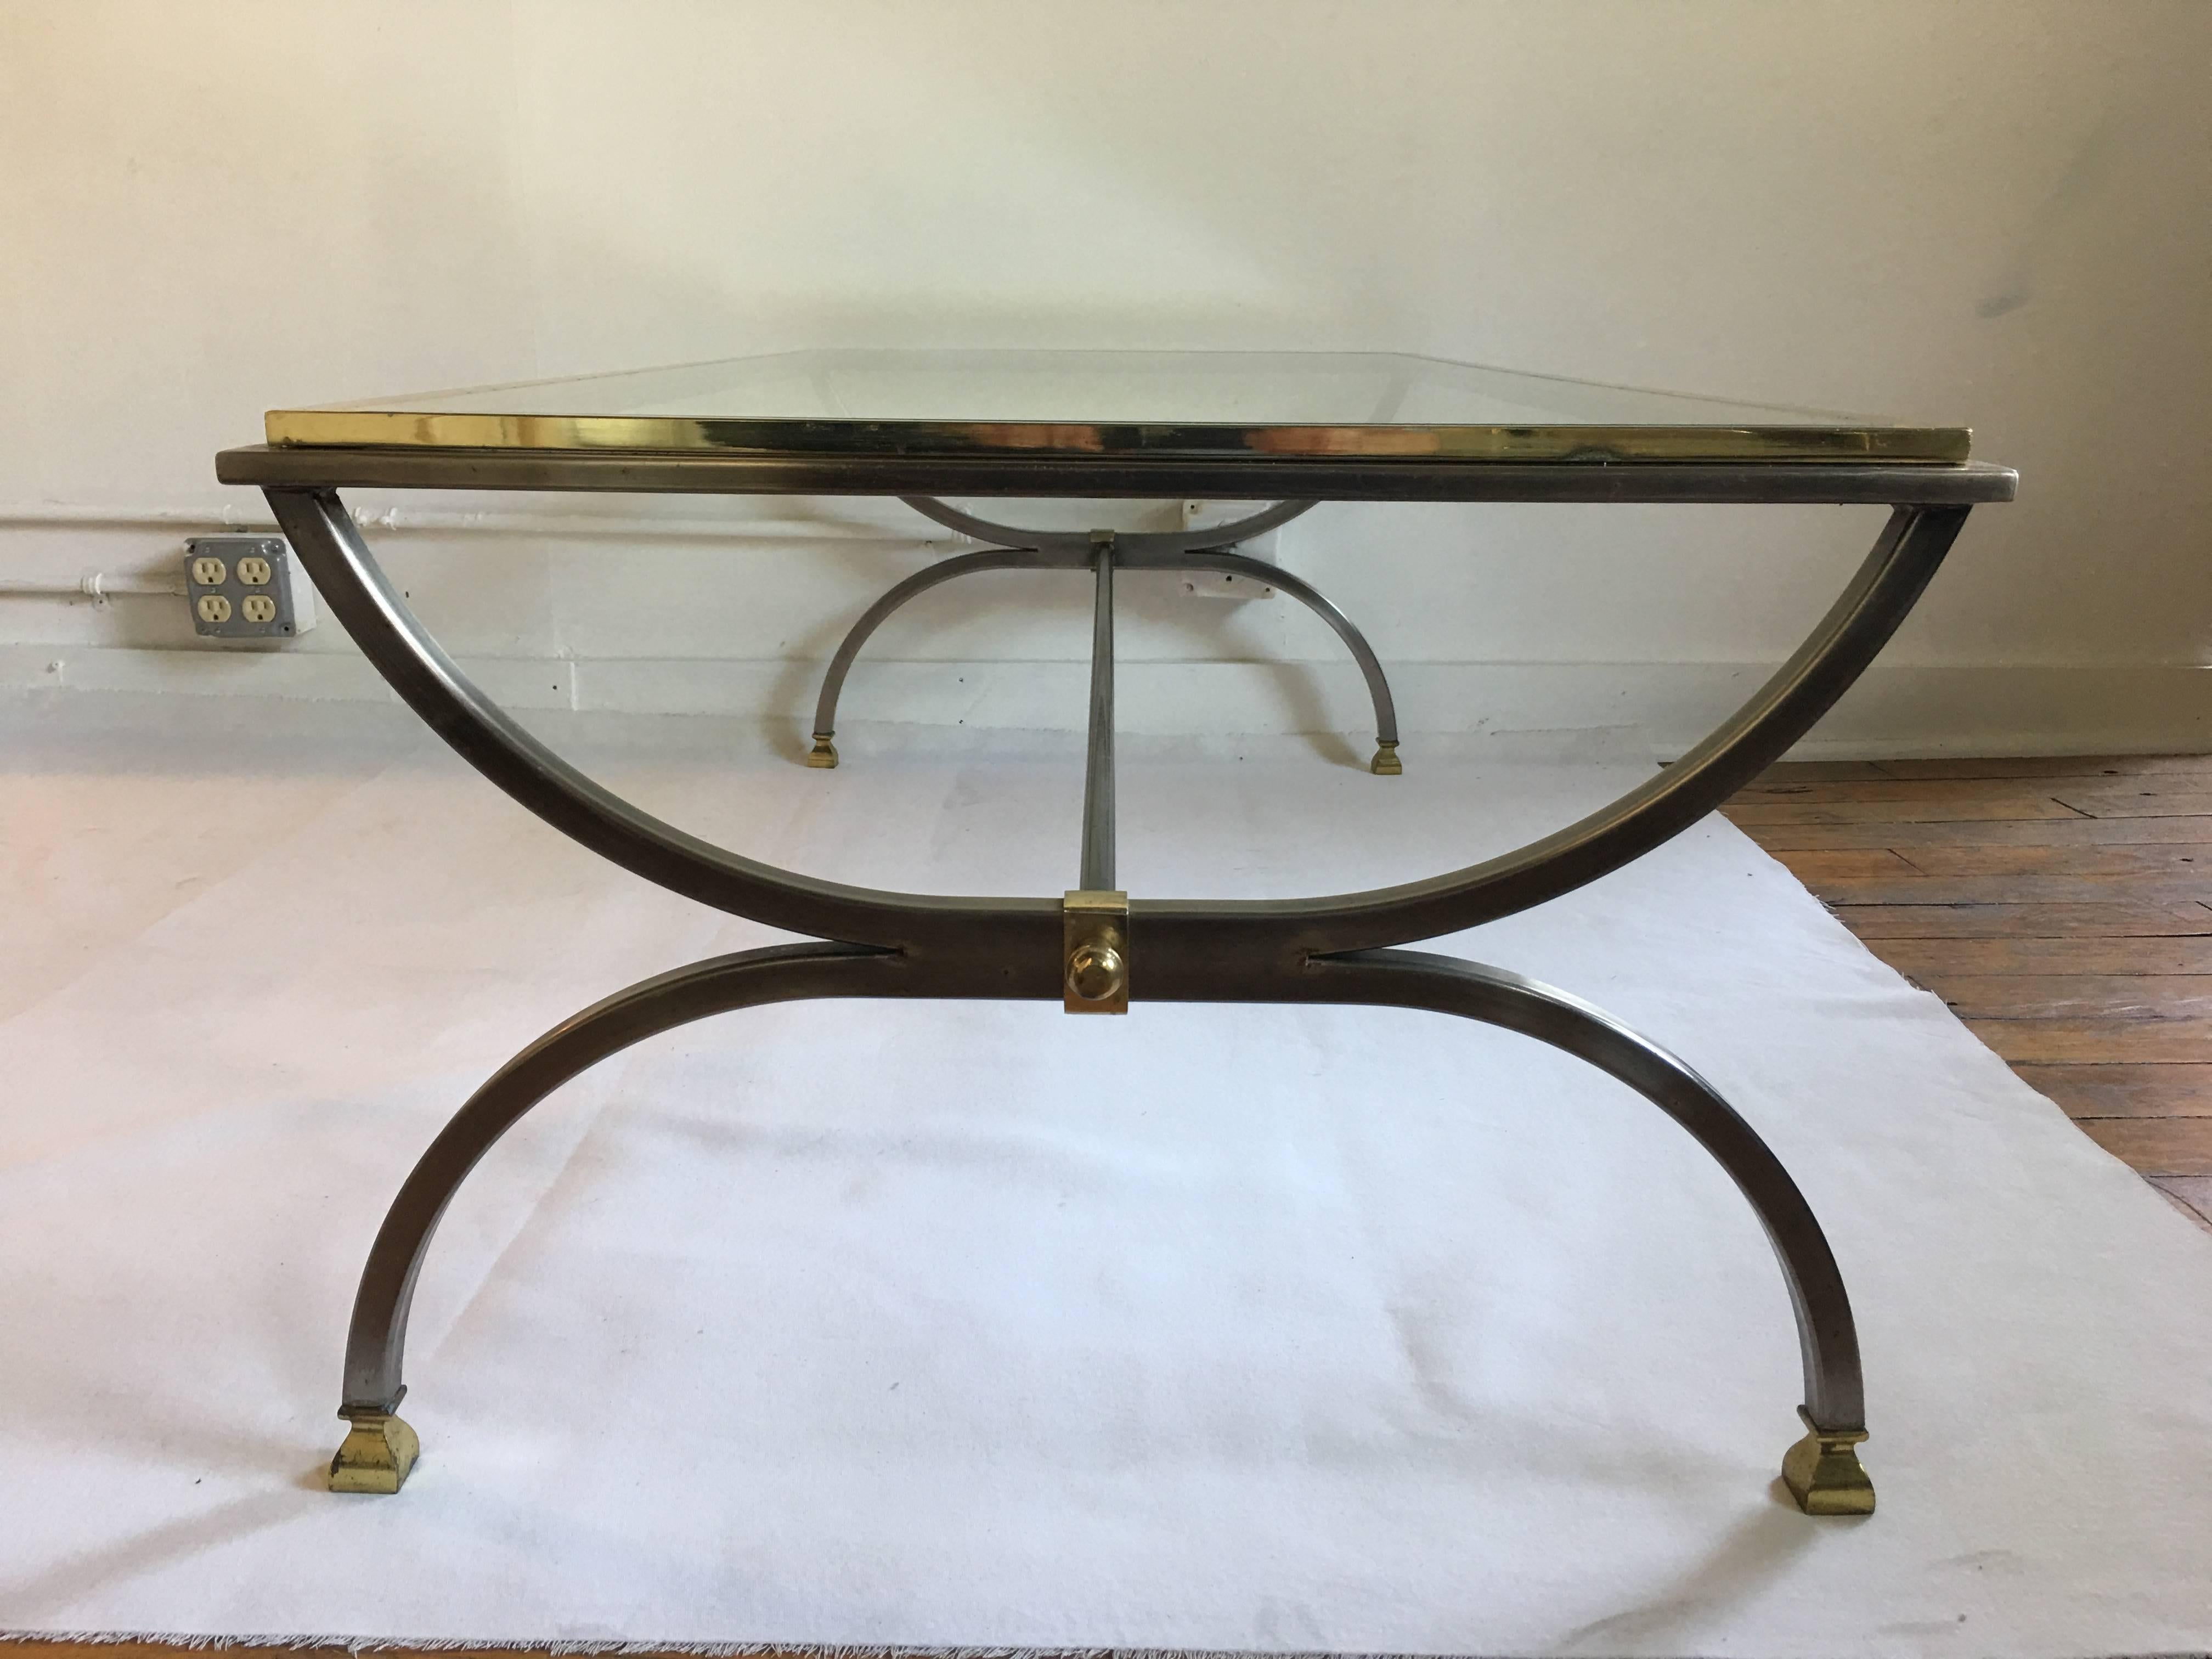 Large midcentury brass and chrome rectangle shaped cocktail table with a removable clear glass top. Curved/arched legs feature a center stretcher rod support and square capped footed legs.